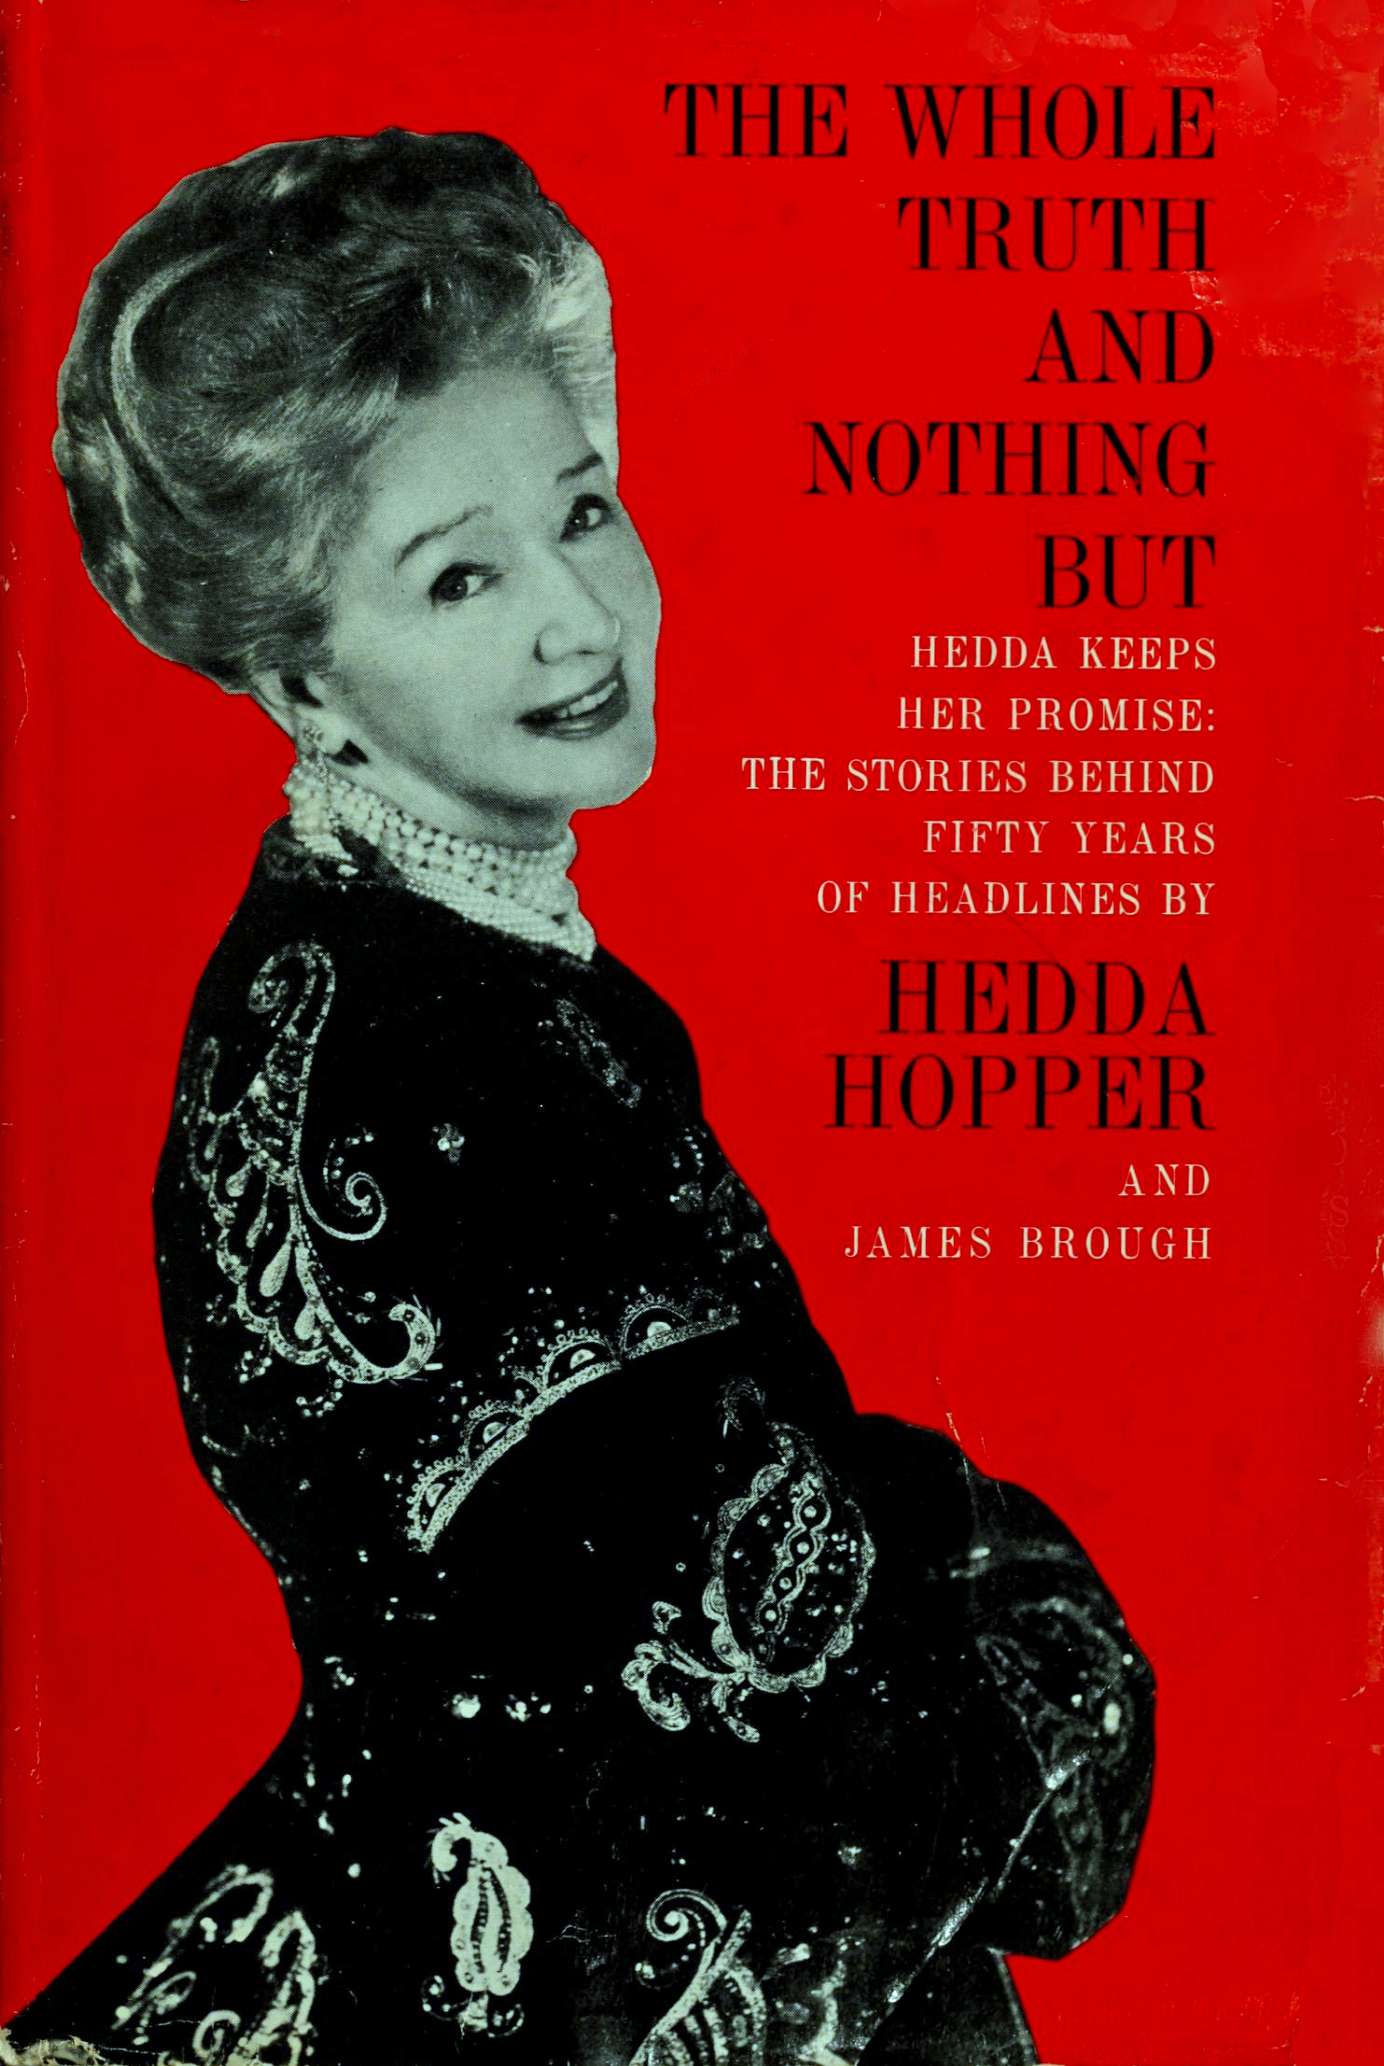 The Whole Truth And Nothing But, by Hedda Hopper and James Brough